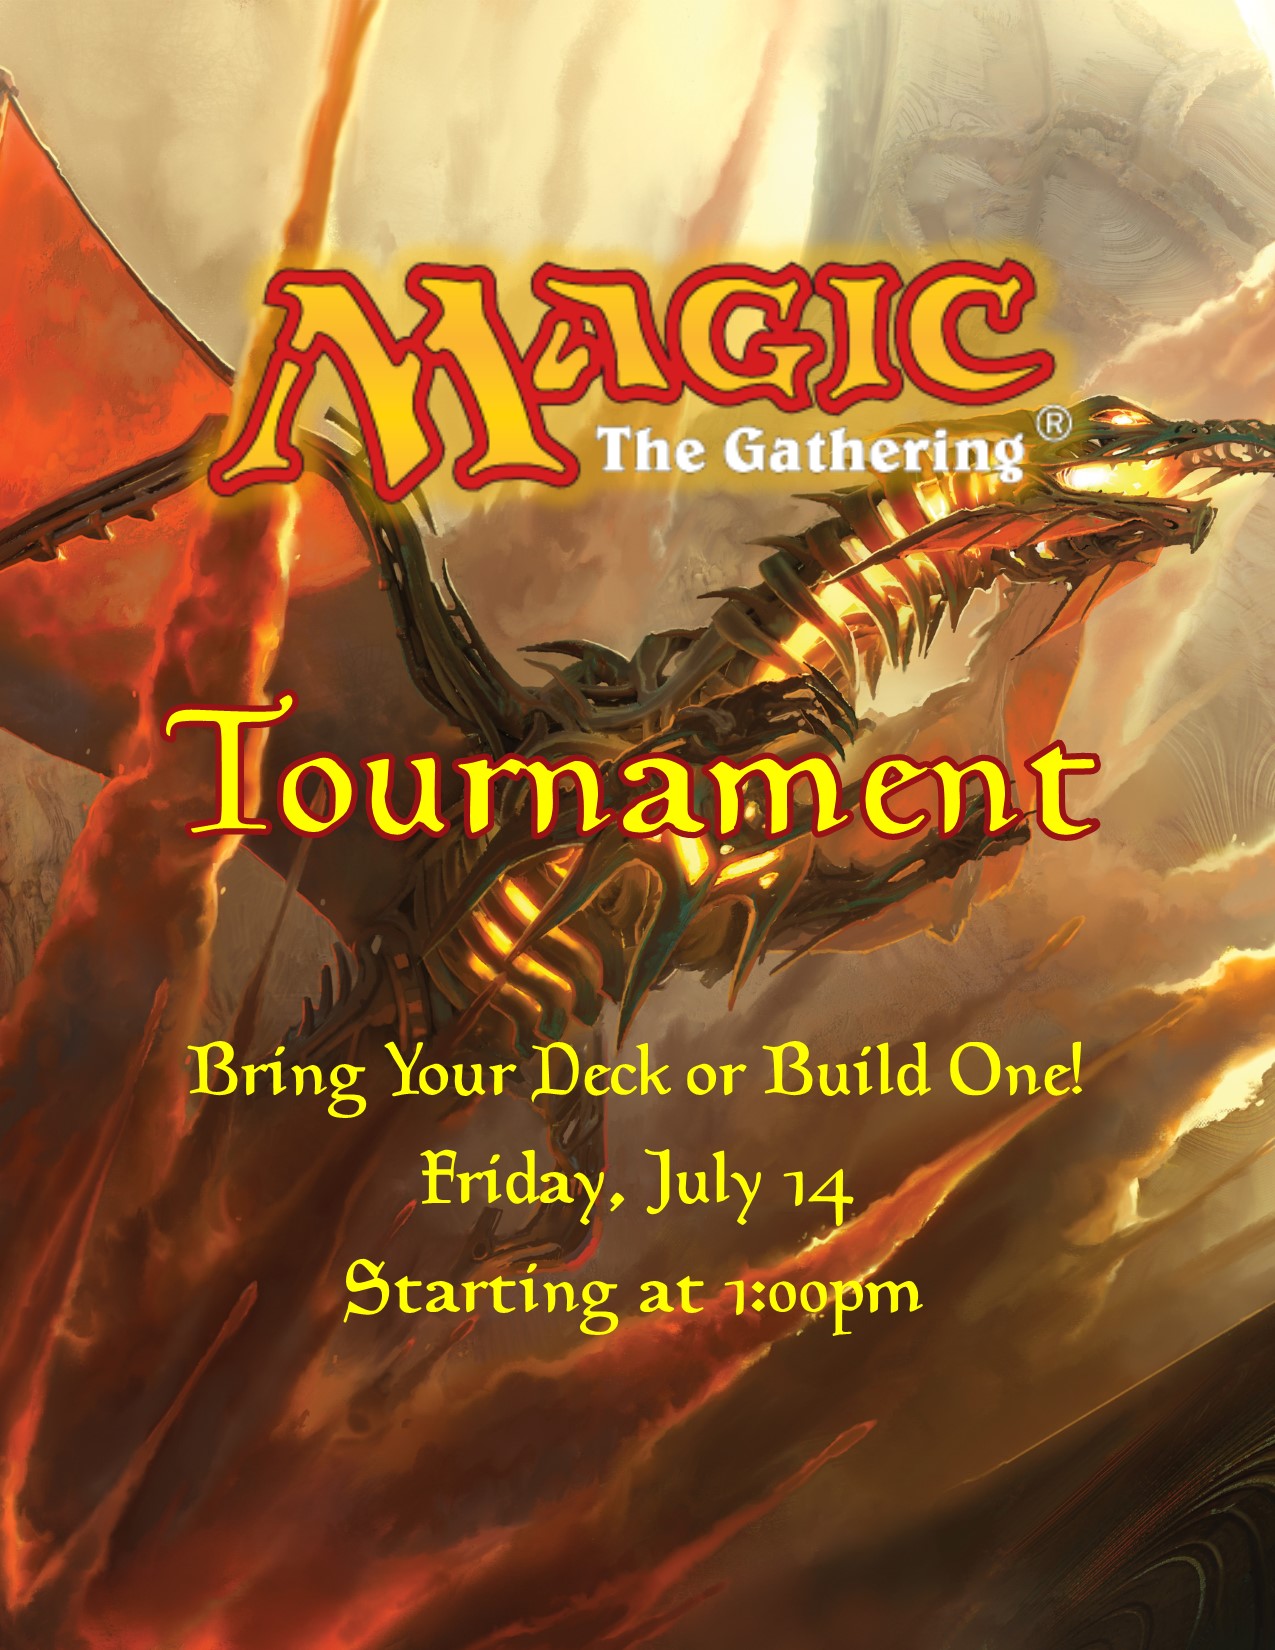 Dragon background with the words Magic the Gathering Tournament, Bring Your Deck or Build One, Friday July 14, Starting at 1:00pm